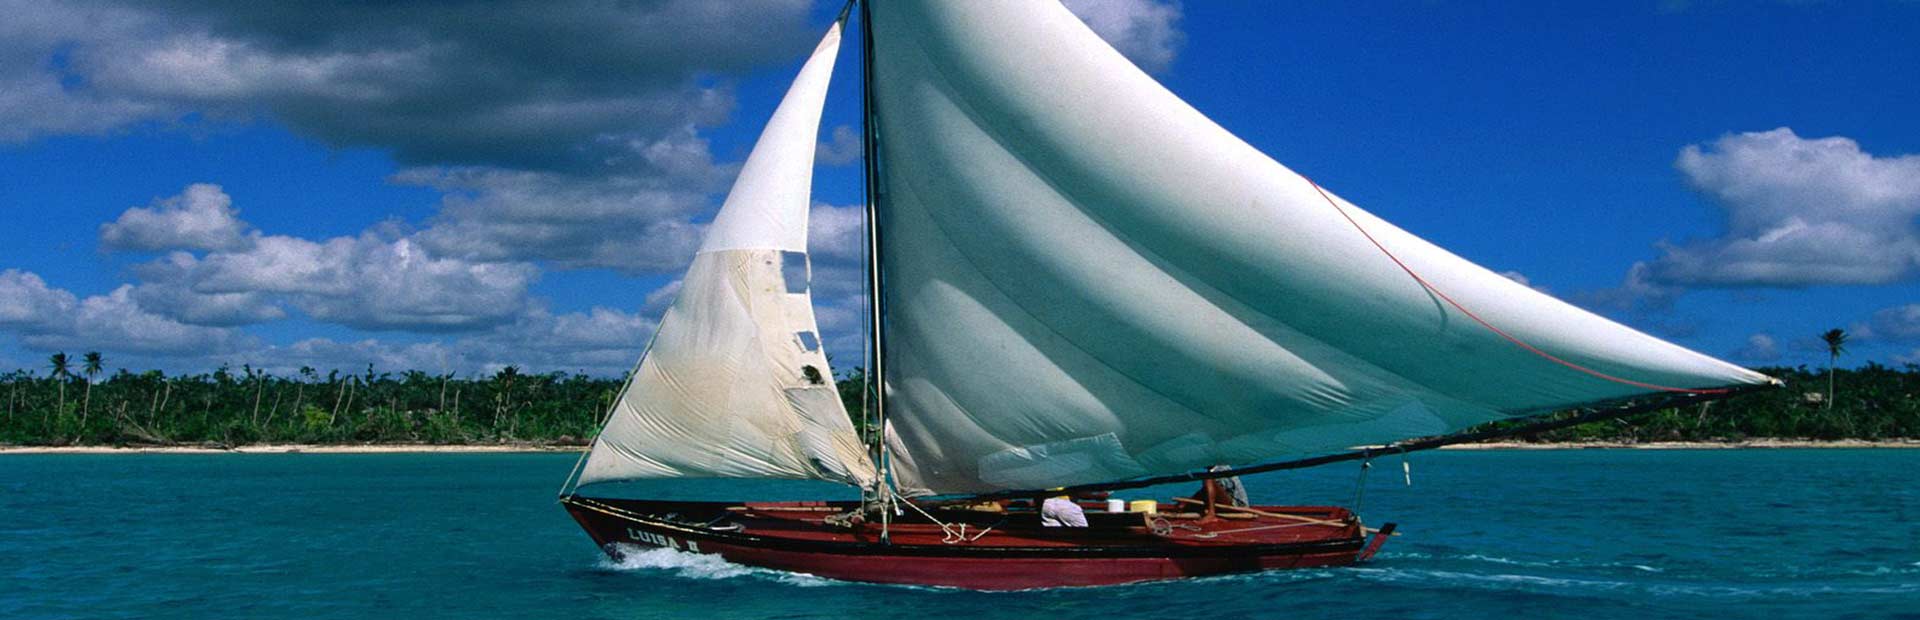 Beautiful wooden sailboat with sails catching the wind on shallow ocean waters by island shore.